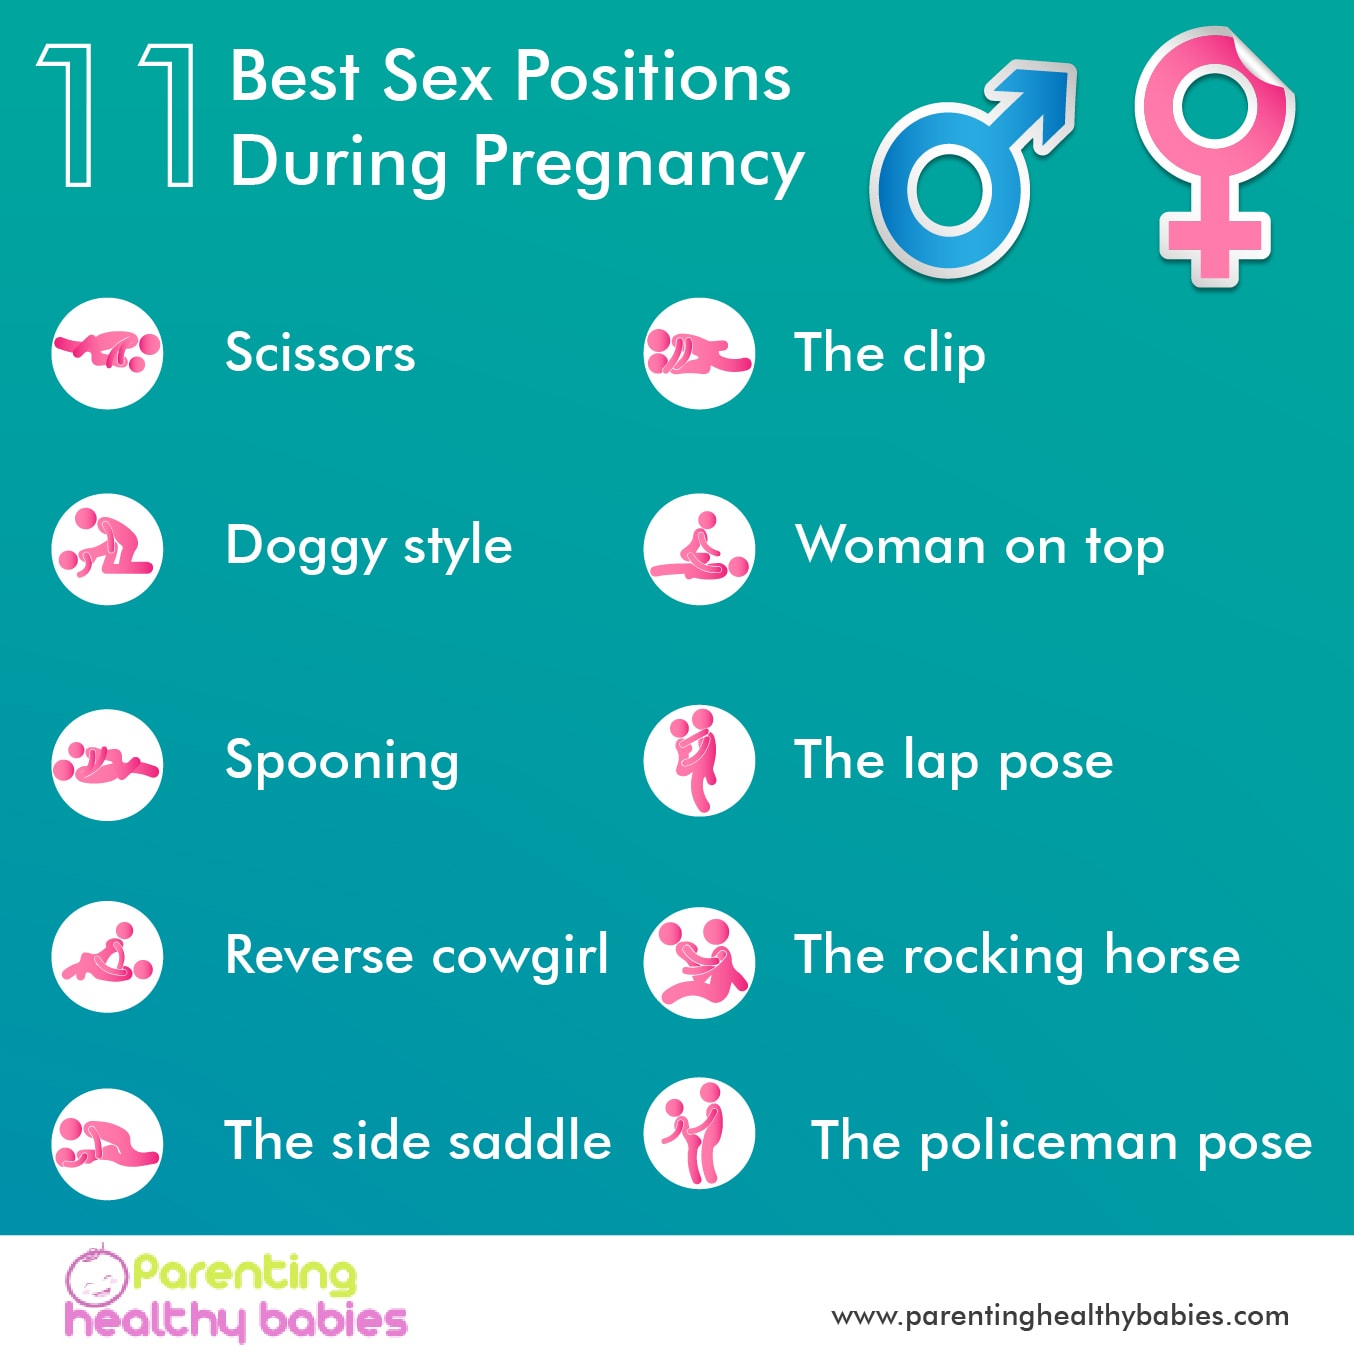 11 sex positions during pregnancy